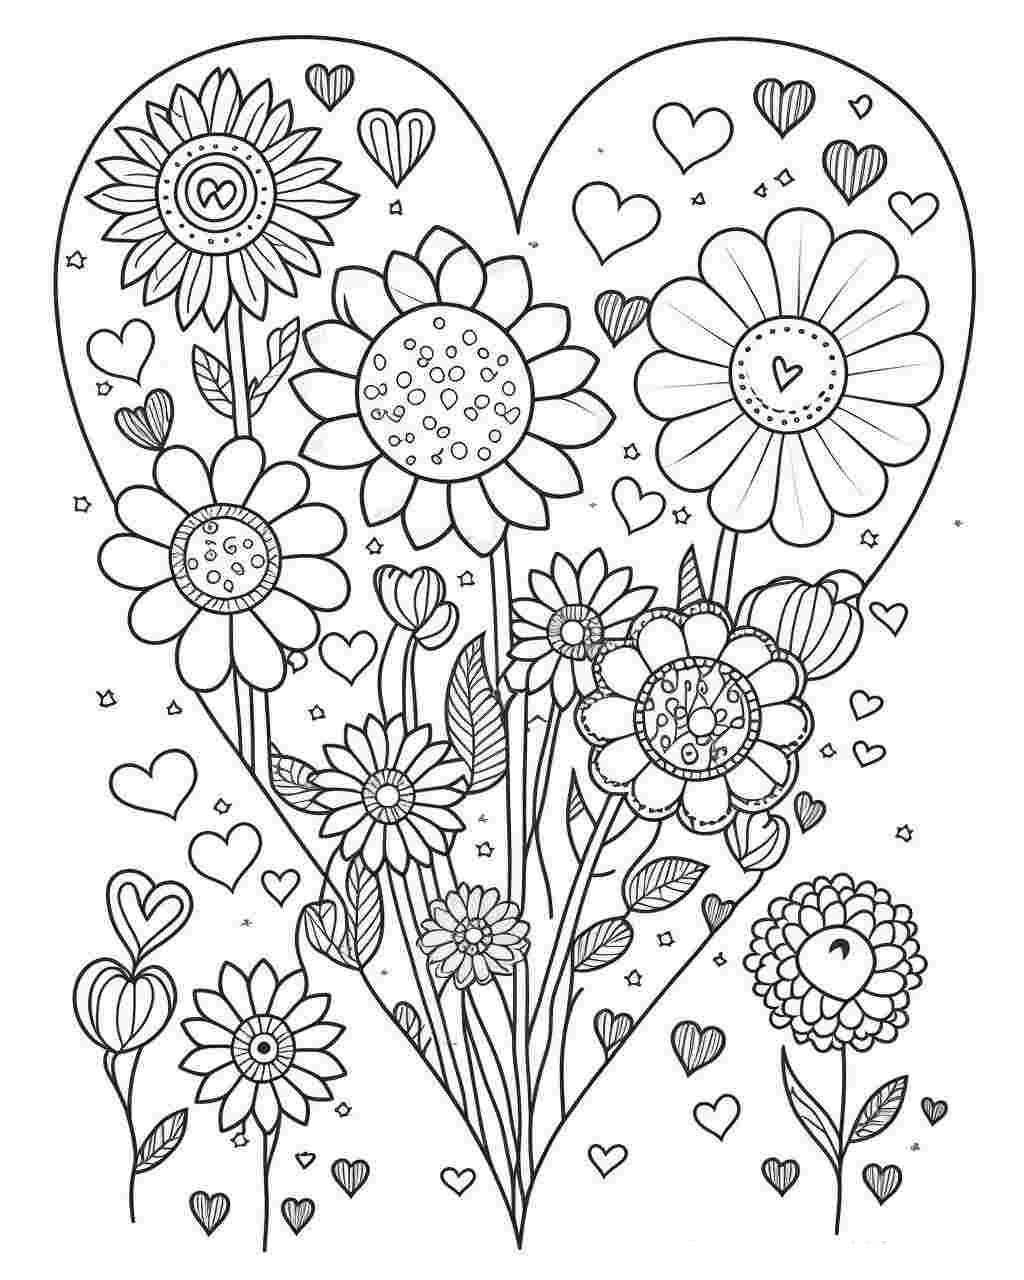 Hearts and Flowers Coloring Page 2 - ColoringFunHouse